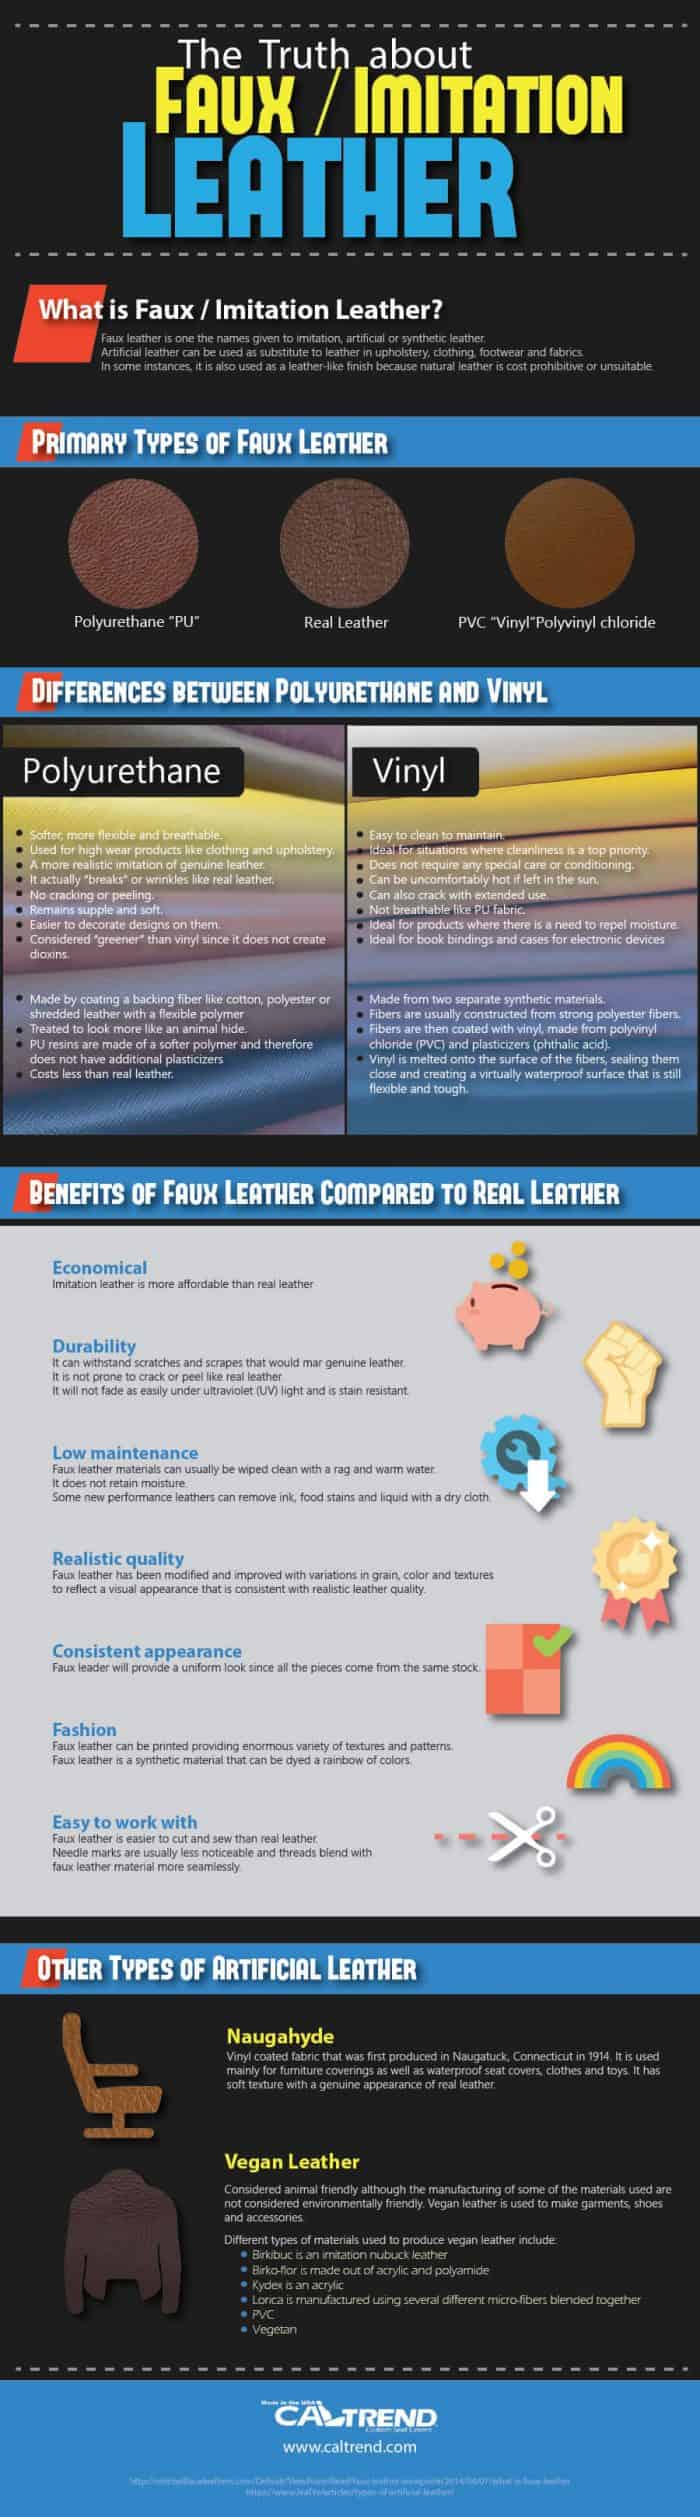 infographic describes the benefits of faux leather